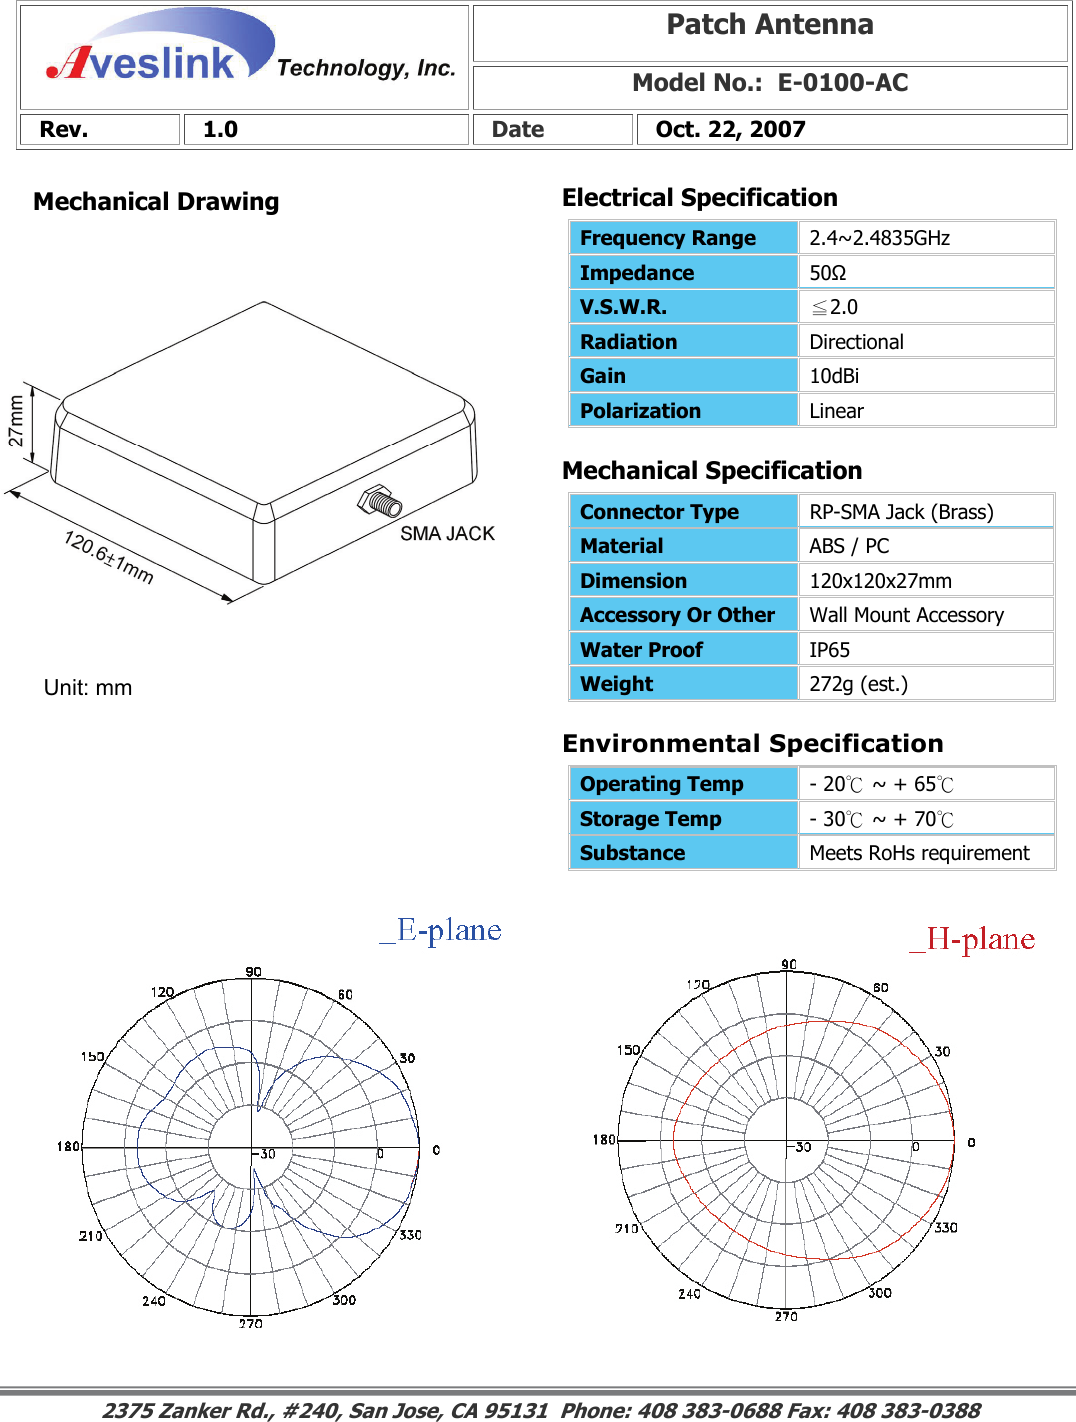 Mechanical DrawingMechanical Specification Environmental SpecificationPatch Antenna Model No.:  E-0100-AC Rev.   1.0   Date   Oct. 22, 2007 Connector Type   RP-SMA Jack (Brass) Material  ABS / PC Dimension  120x120x27mm Accessory Or Other  Wall Mount Accessory Water Proof  IP65 Weight  272g (est.)                                                                                                                                                                                                                        2375 Zanker Rd., #240, San Jose, CA 95131  Phone: 408 383-0688 Fax: 408 383-0388 Operating Temp  - 20℃ ~ + 65℃ Storage Temp  - 30℃ ~ + 70℃ Substance  Meets RoHs requirement Electrical SpecificationFrequency Range   2.4~2.4835GHz Impedance  50Ω V.S.W.R.  ≦2.0 Radiation  Directional Gain  10dBi Polarization  Linear Unit: mm 